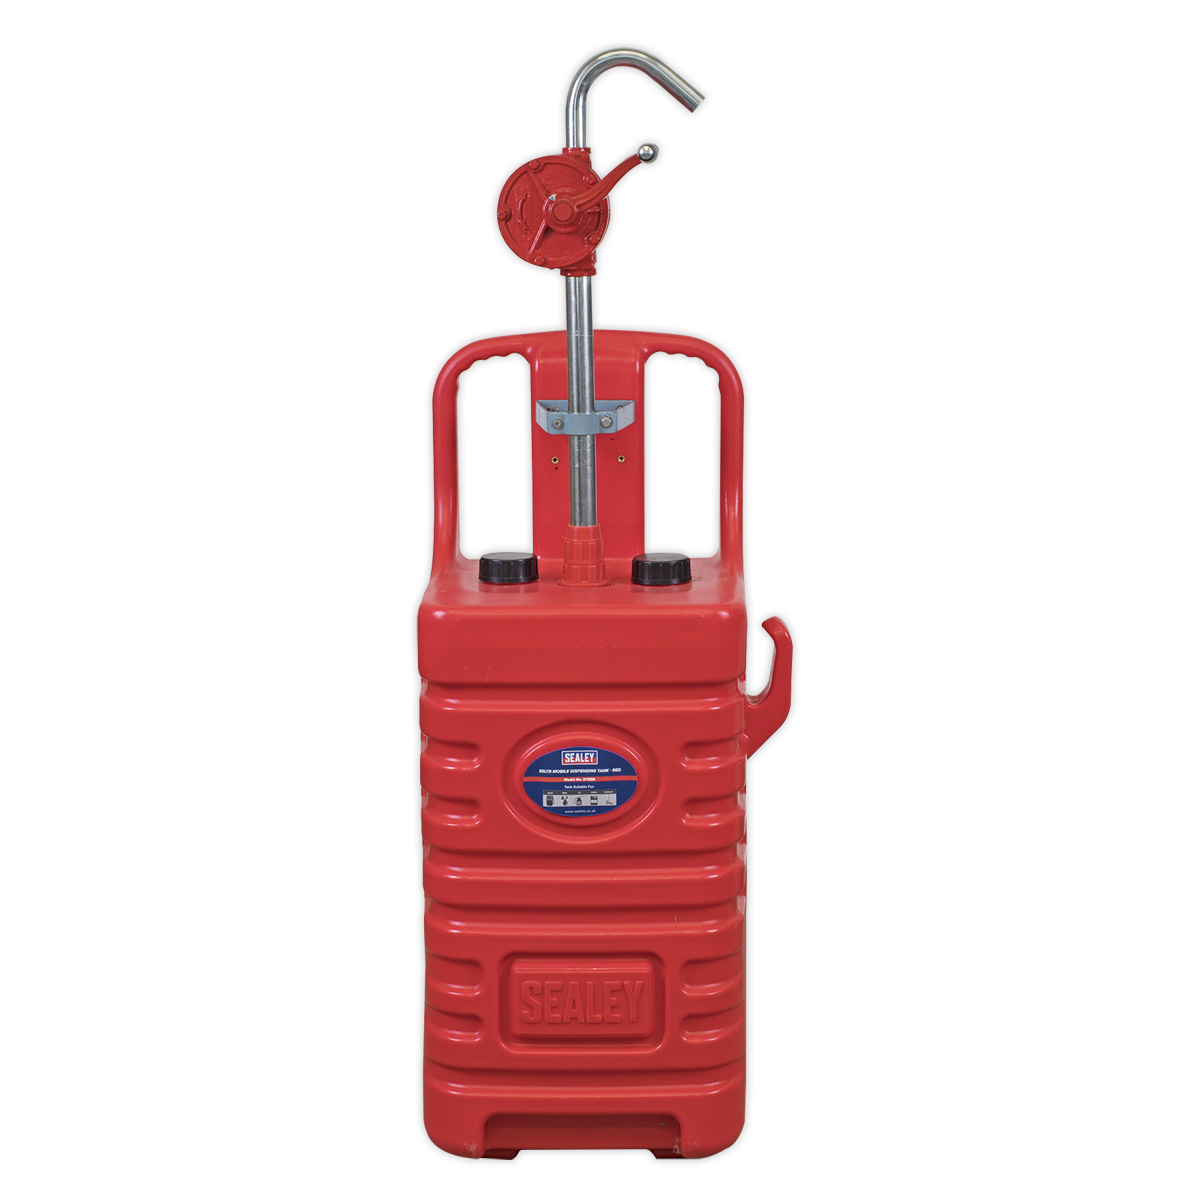 55 litre tank for Diesel, Oil, AdBlue®, Water and Antifreeze dependent on pump